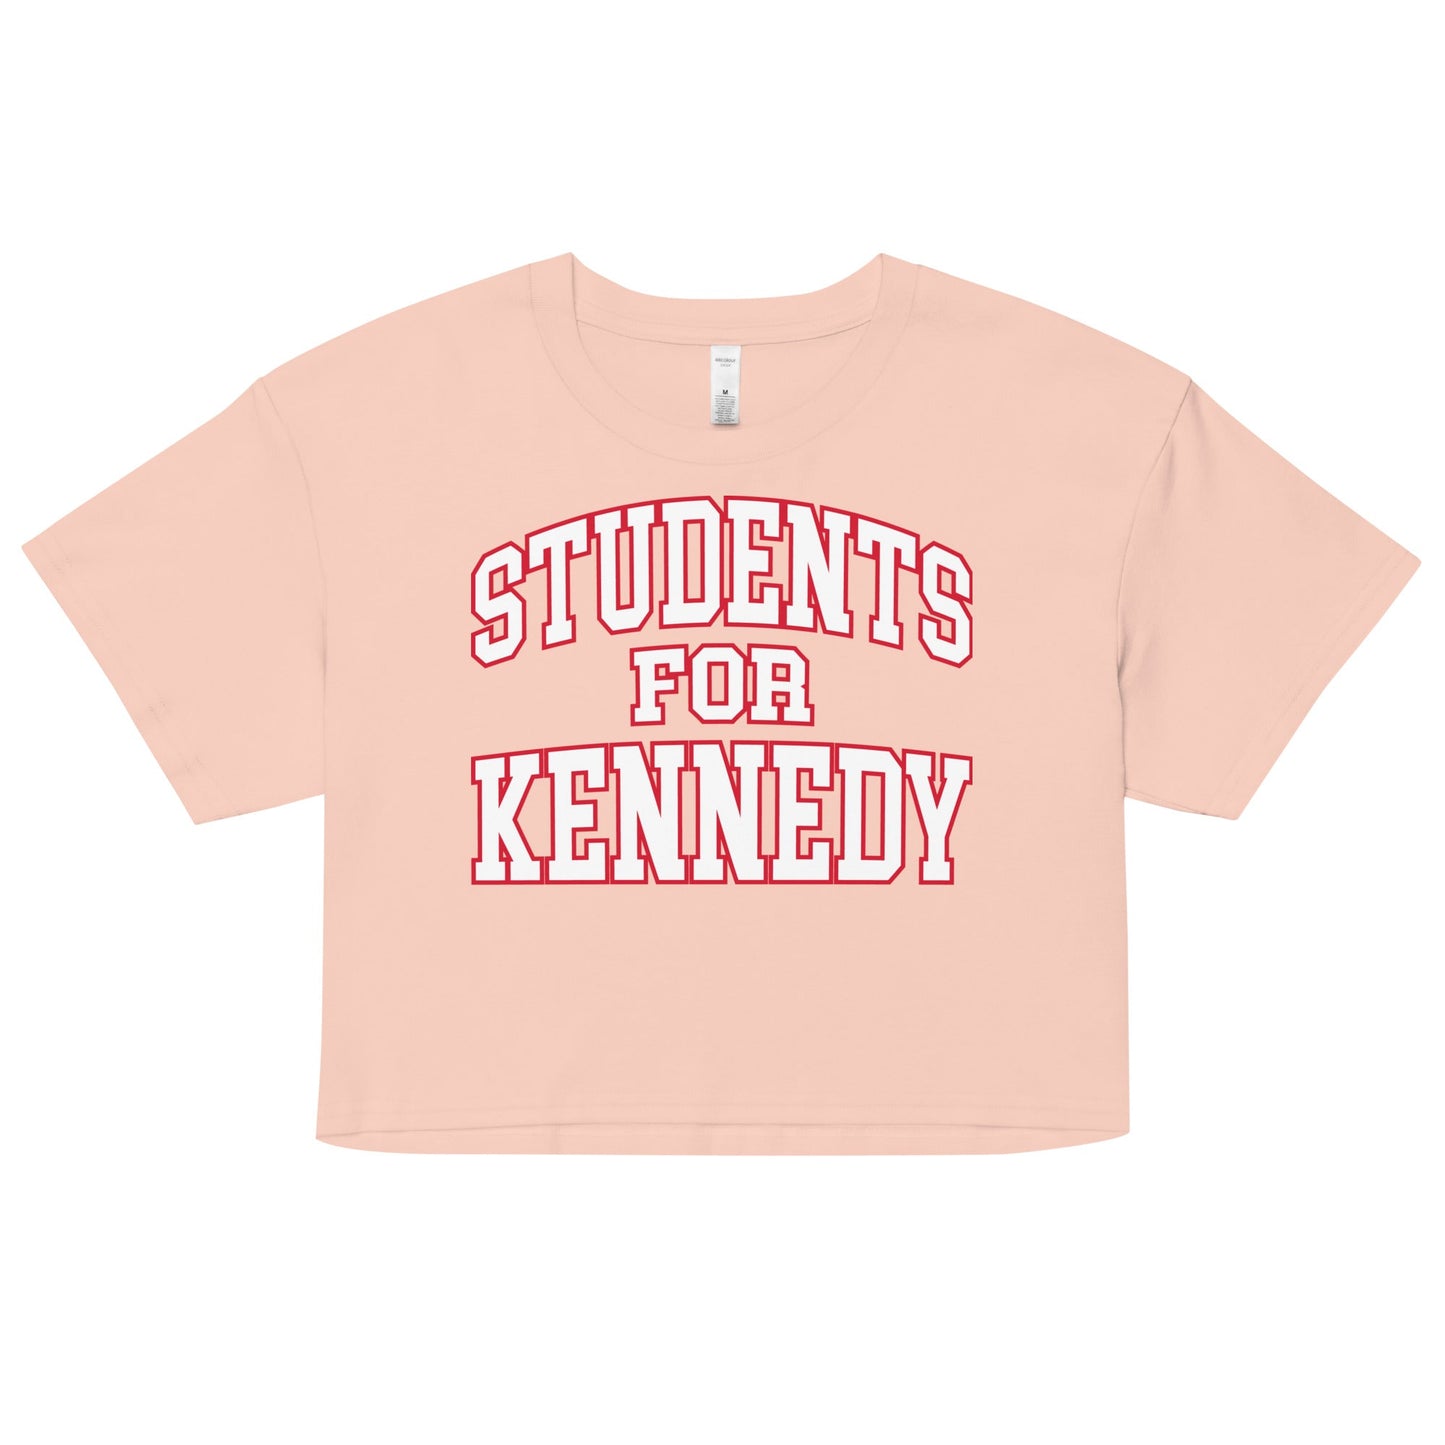 Students for Kennedy Women’s crop top - TEAM KENNEDY. All rights reserved